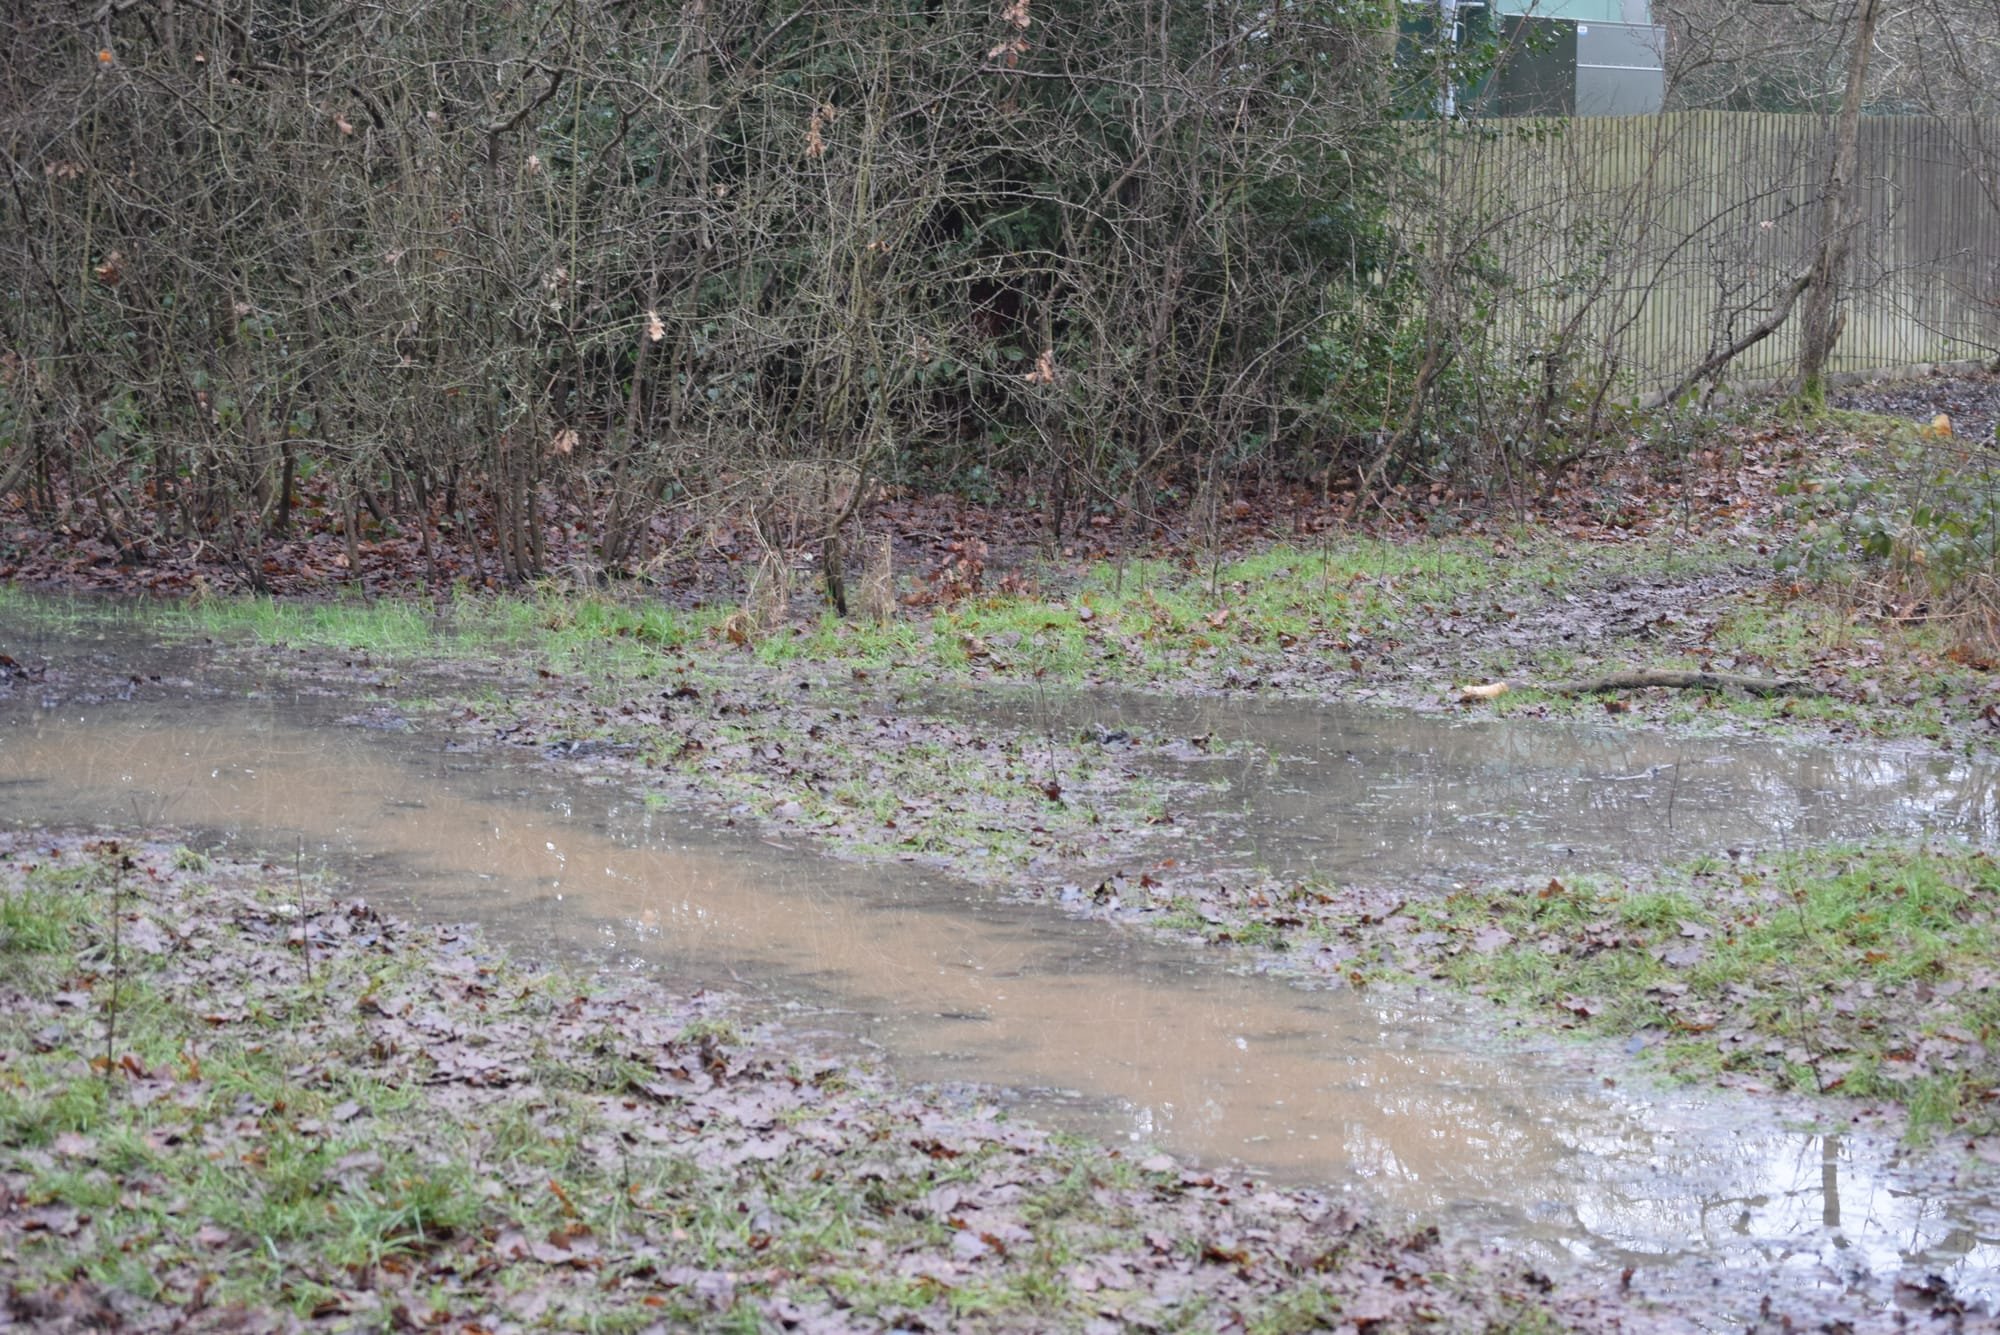 Wet winter conditions make paths ponds